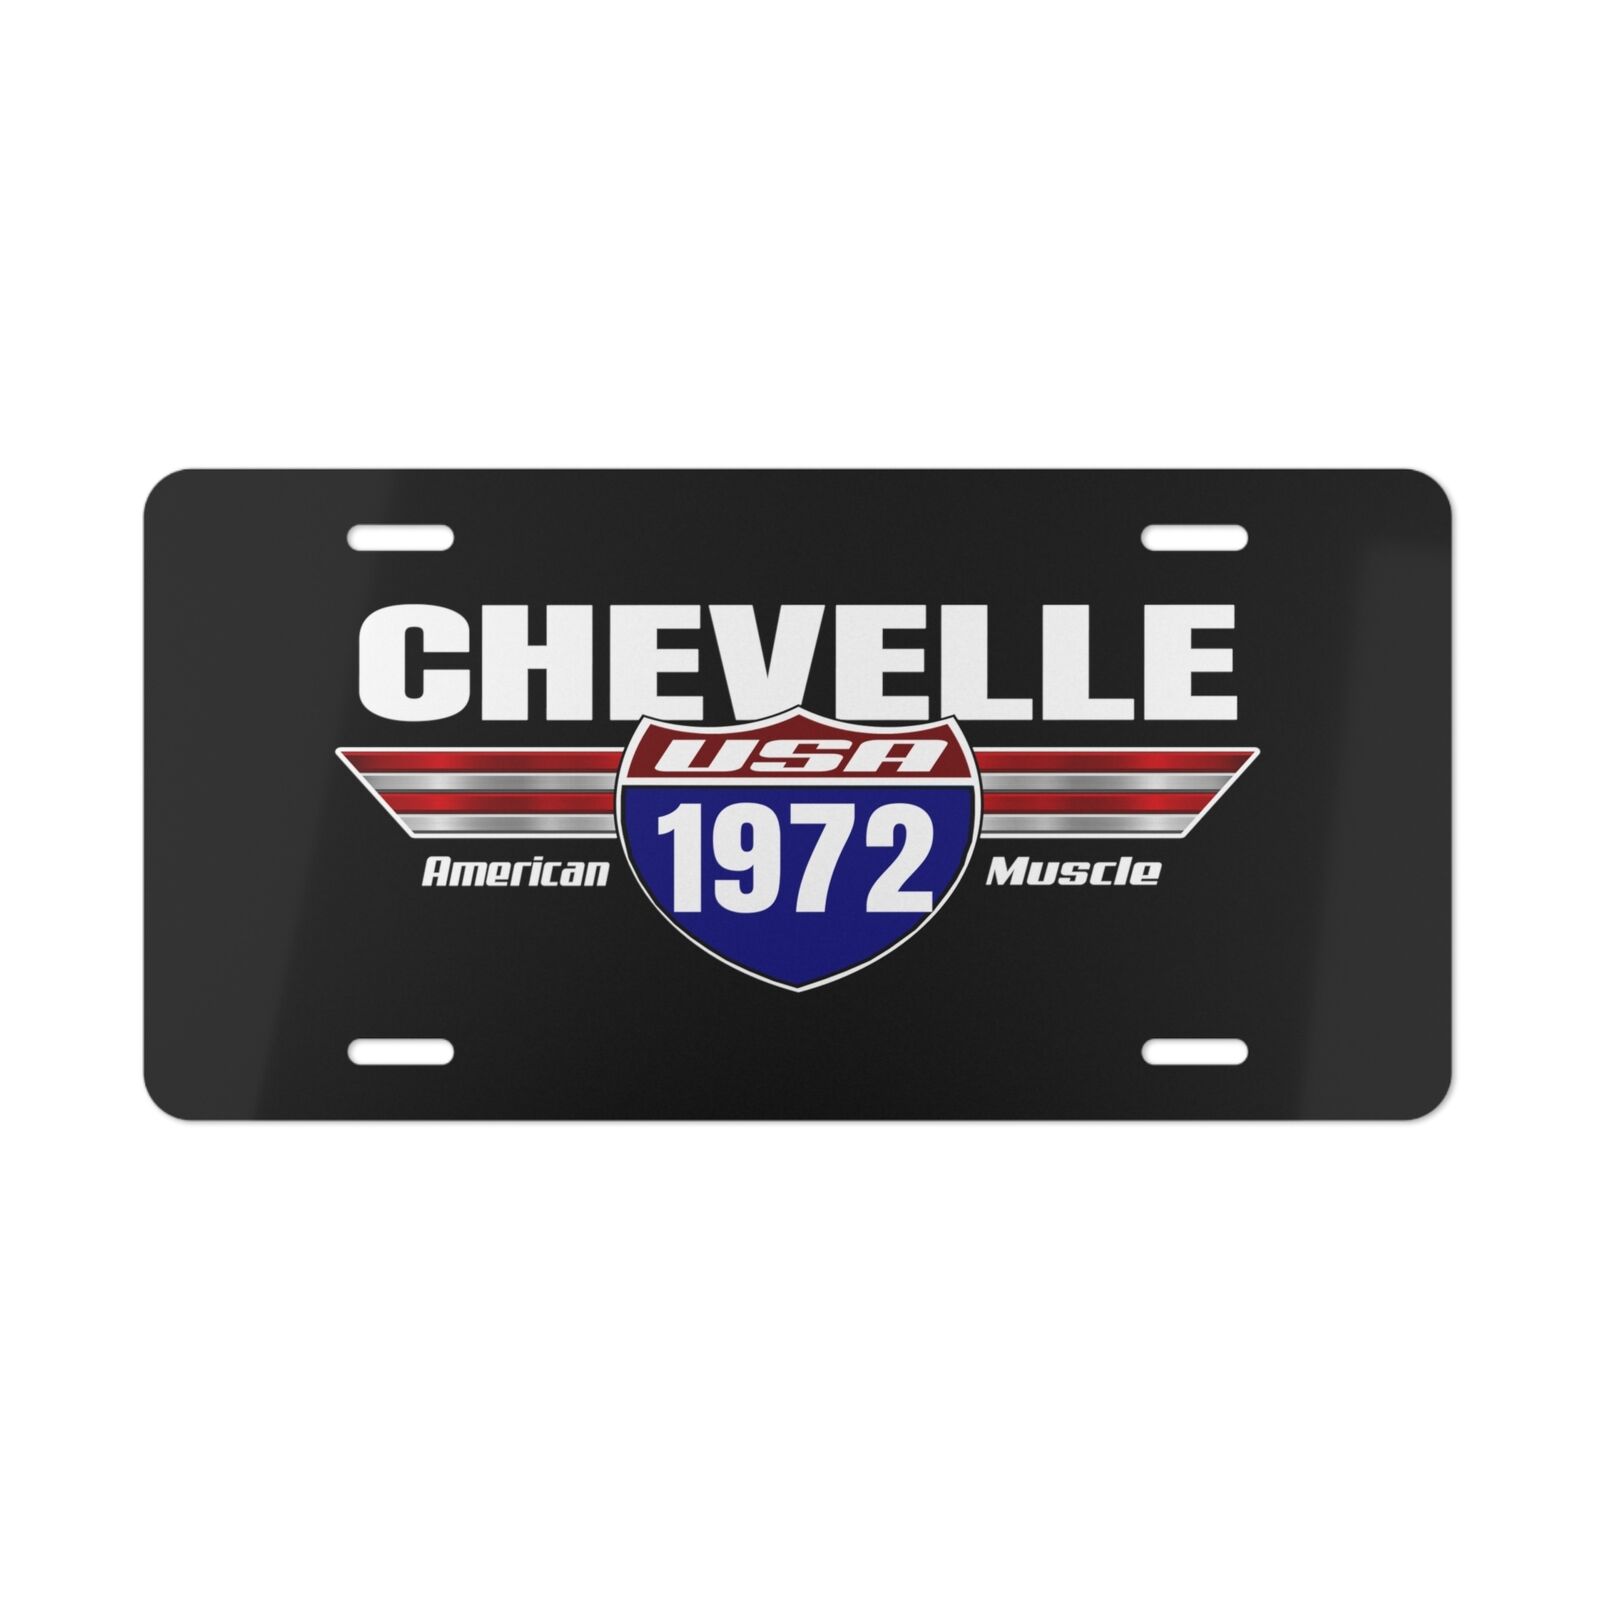 1972 Chevelle Classic Car License Plate Tag - Made in The USA